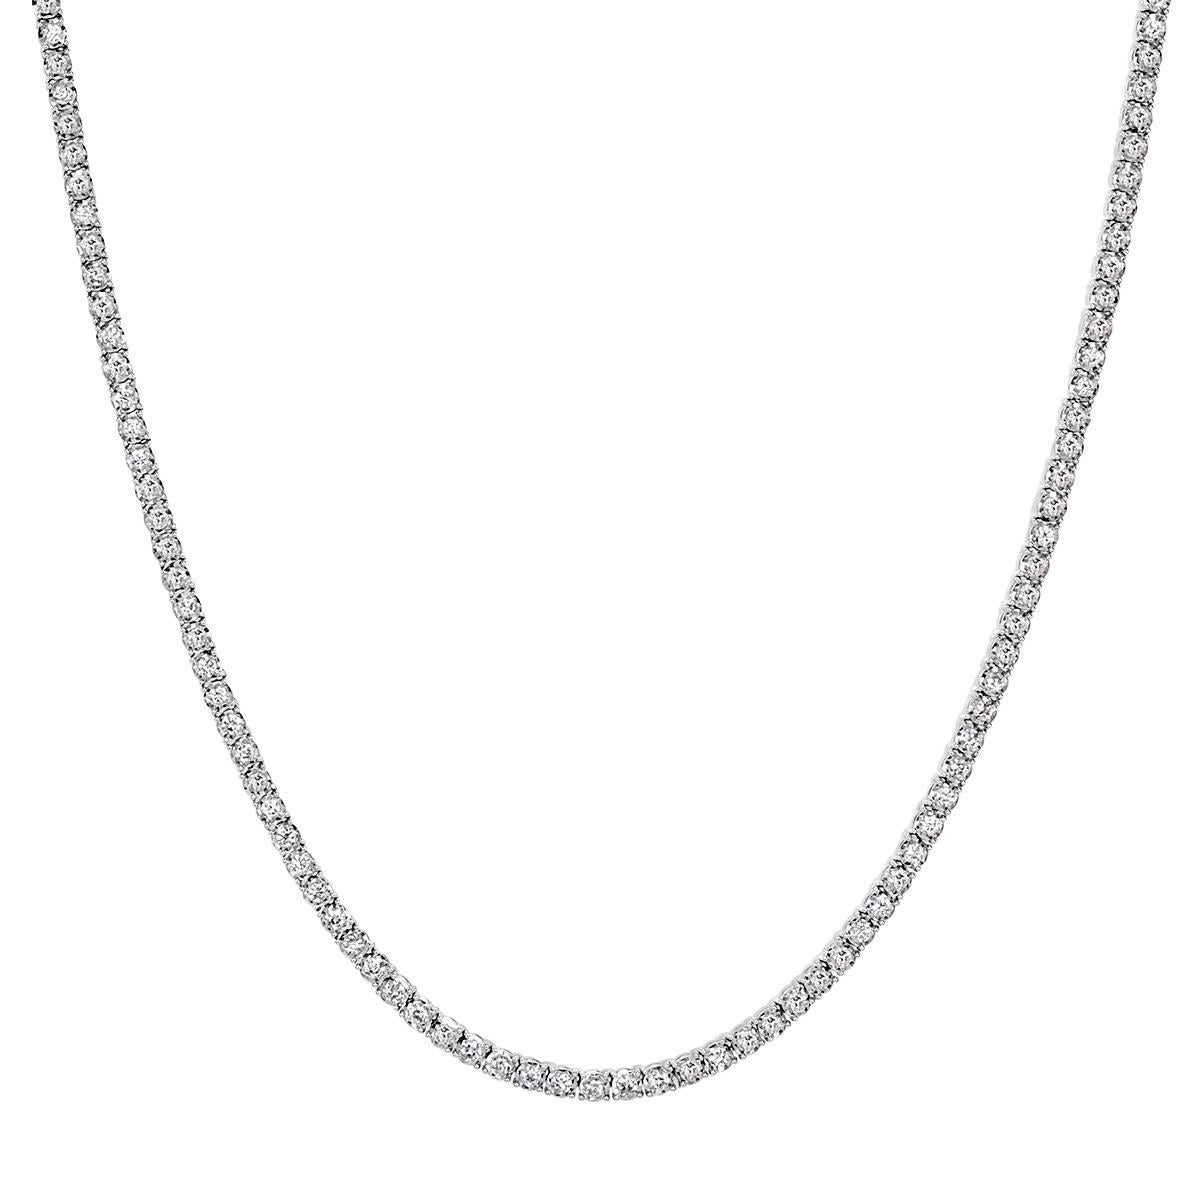 Custom created in 14k white gold, this stunning diamond tennis necklace showcases 8.00ct of round brilliant cut diamonds graded at E-F in color, VS2-SI1 in clarity. They are set in a classic for-prong setting style that appears to float on the